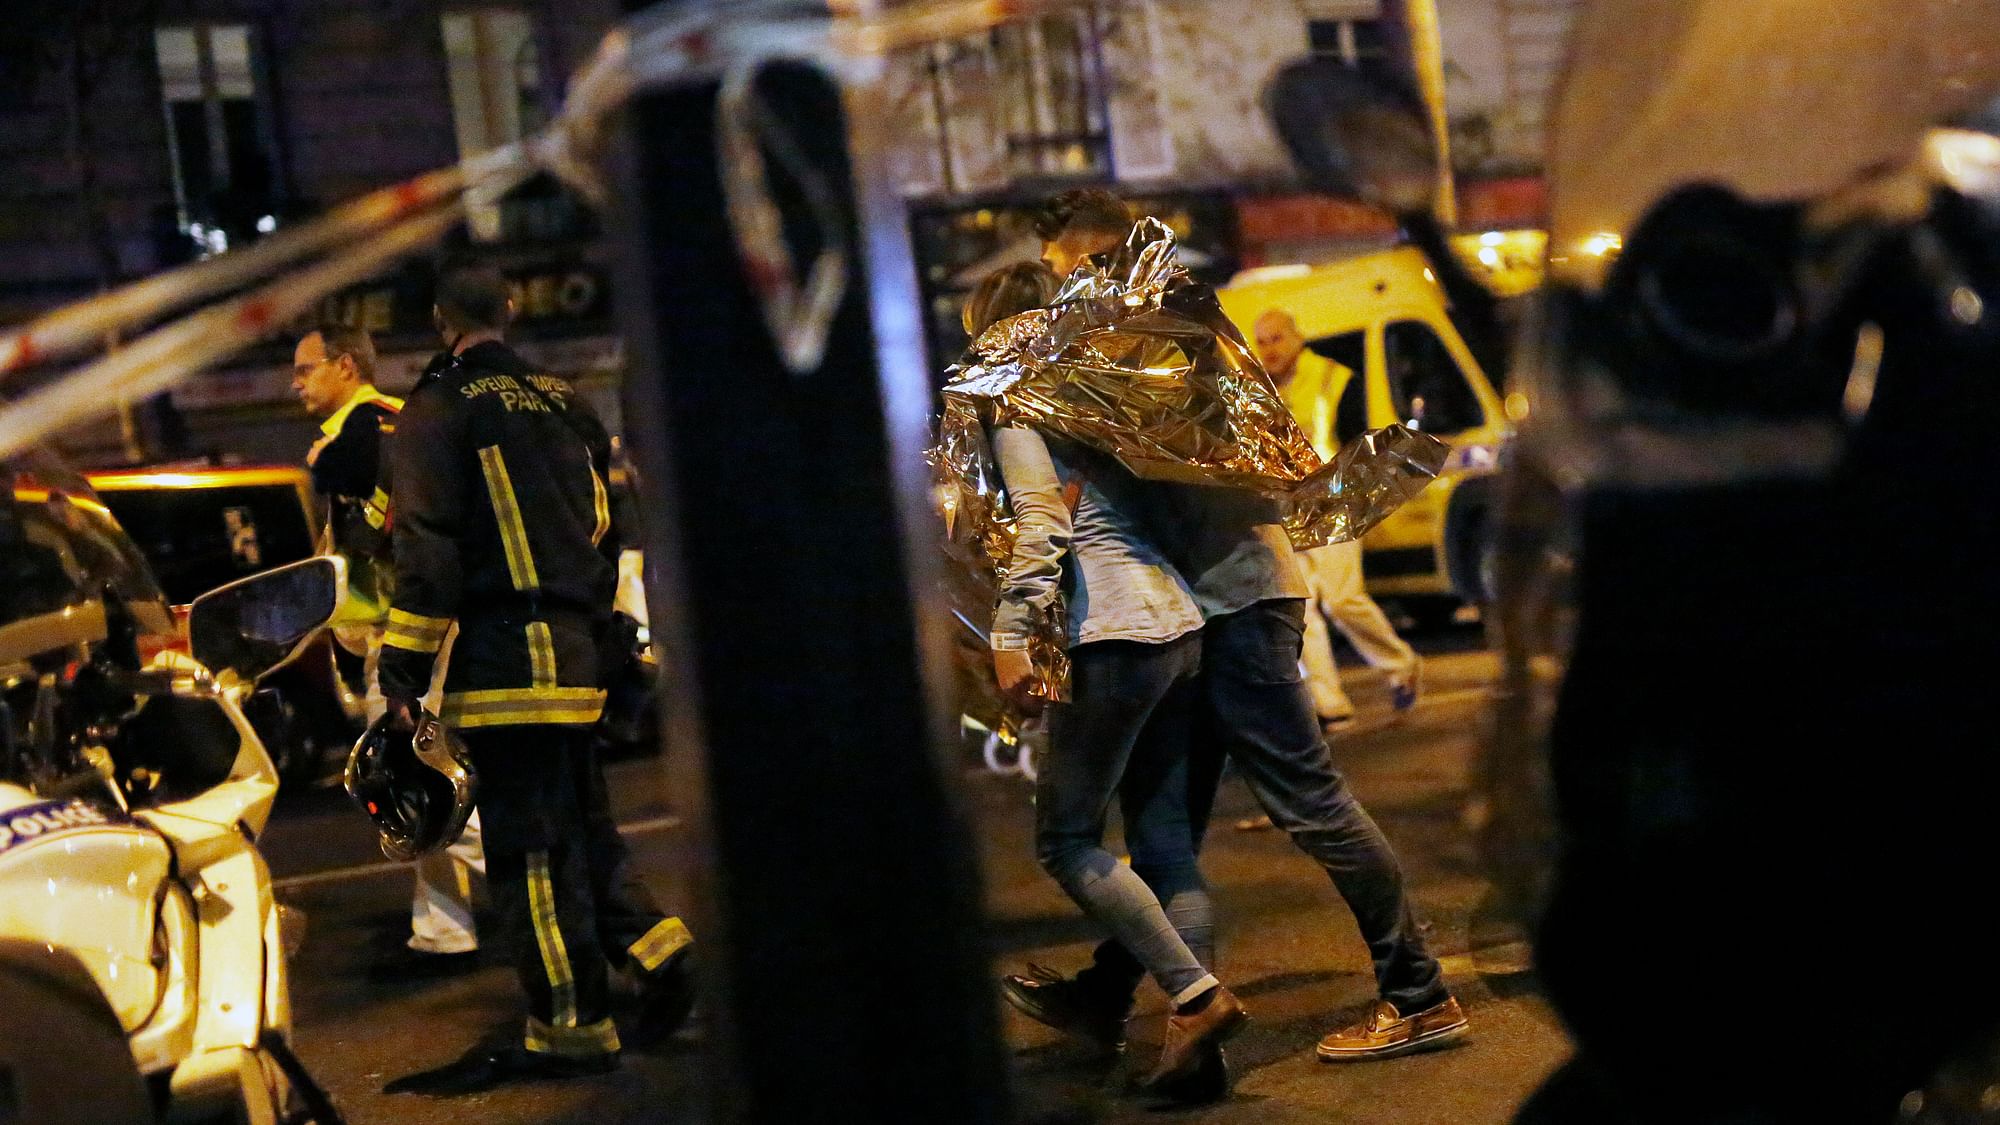 The Bataclan theatre in Paris was attacked by ISIS in November 2015 killing 130 people. (Photo: AP)